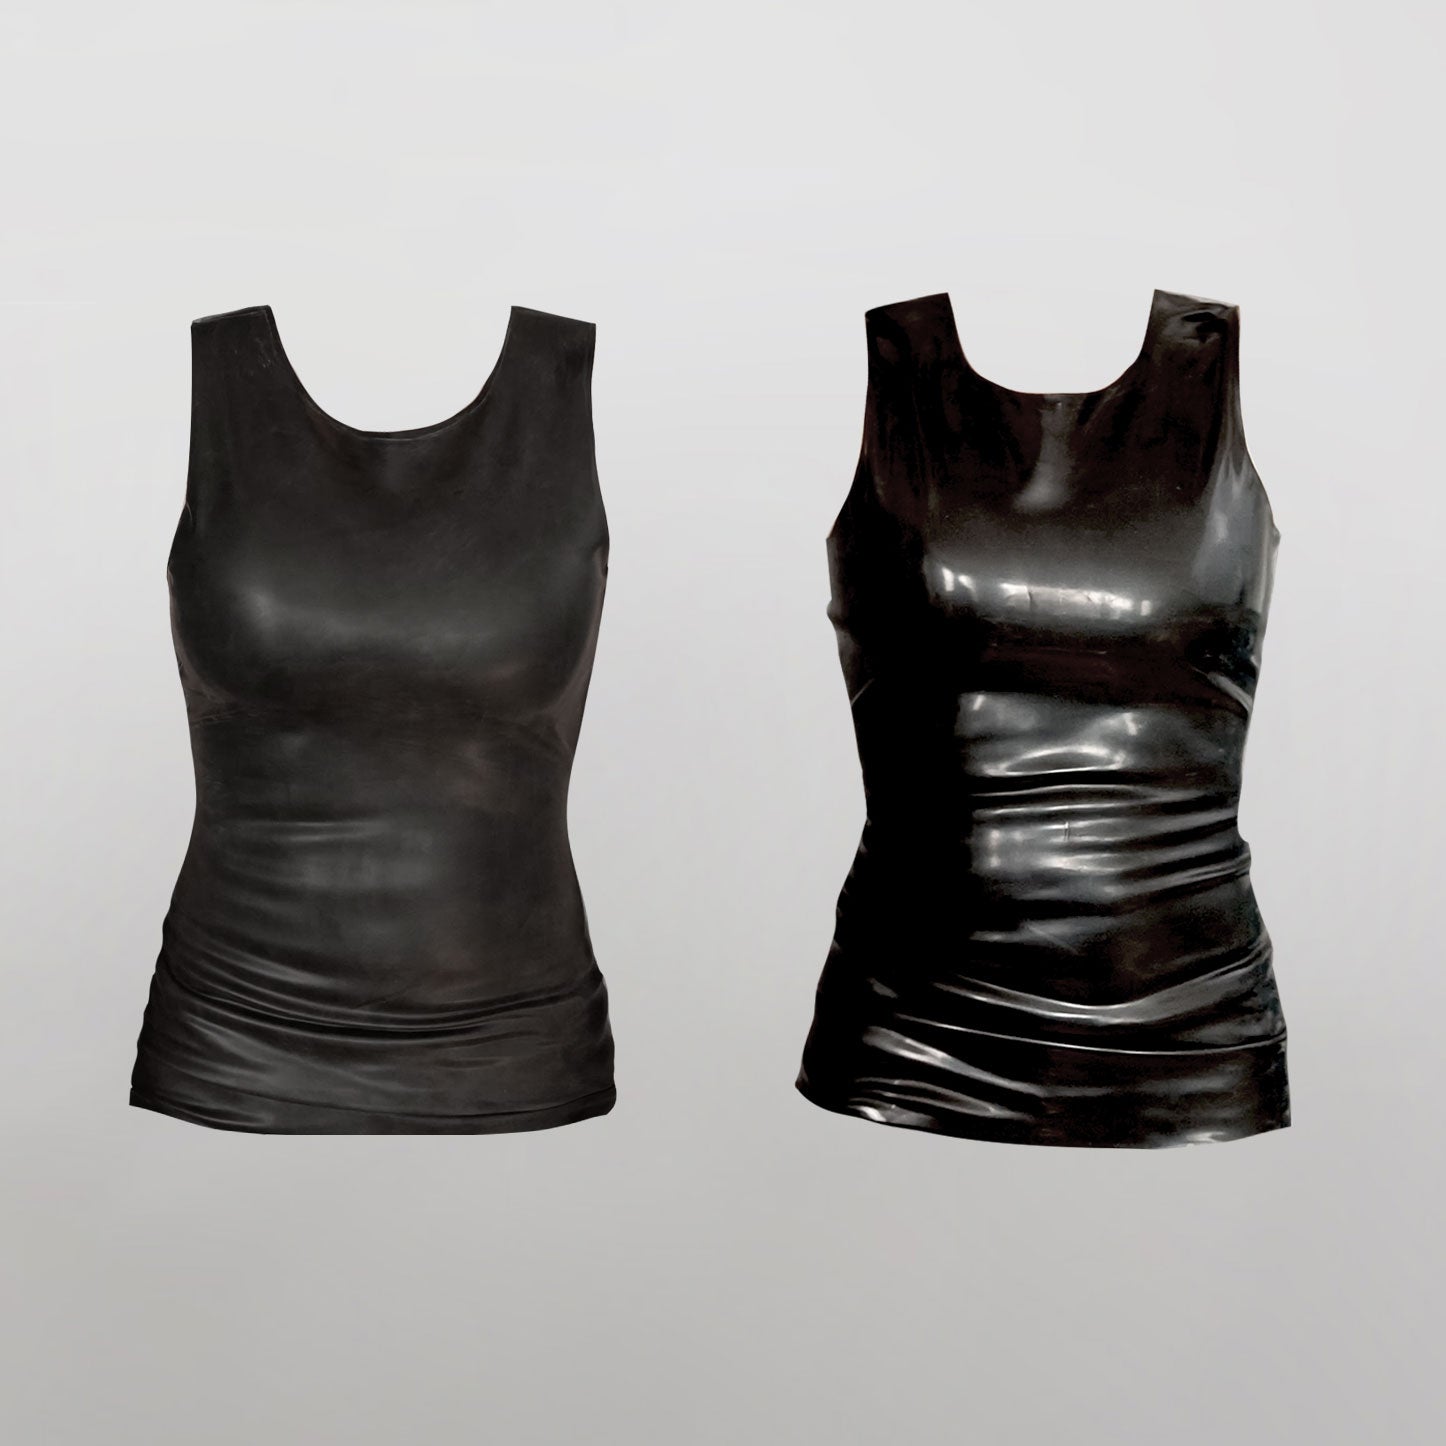 Tank-top-designs-in-matte-and-glossy-made-from-natural-latex-rubber